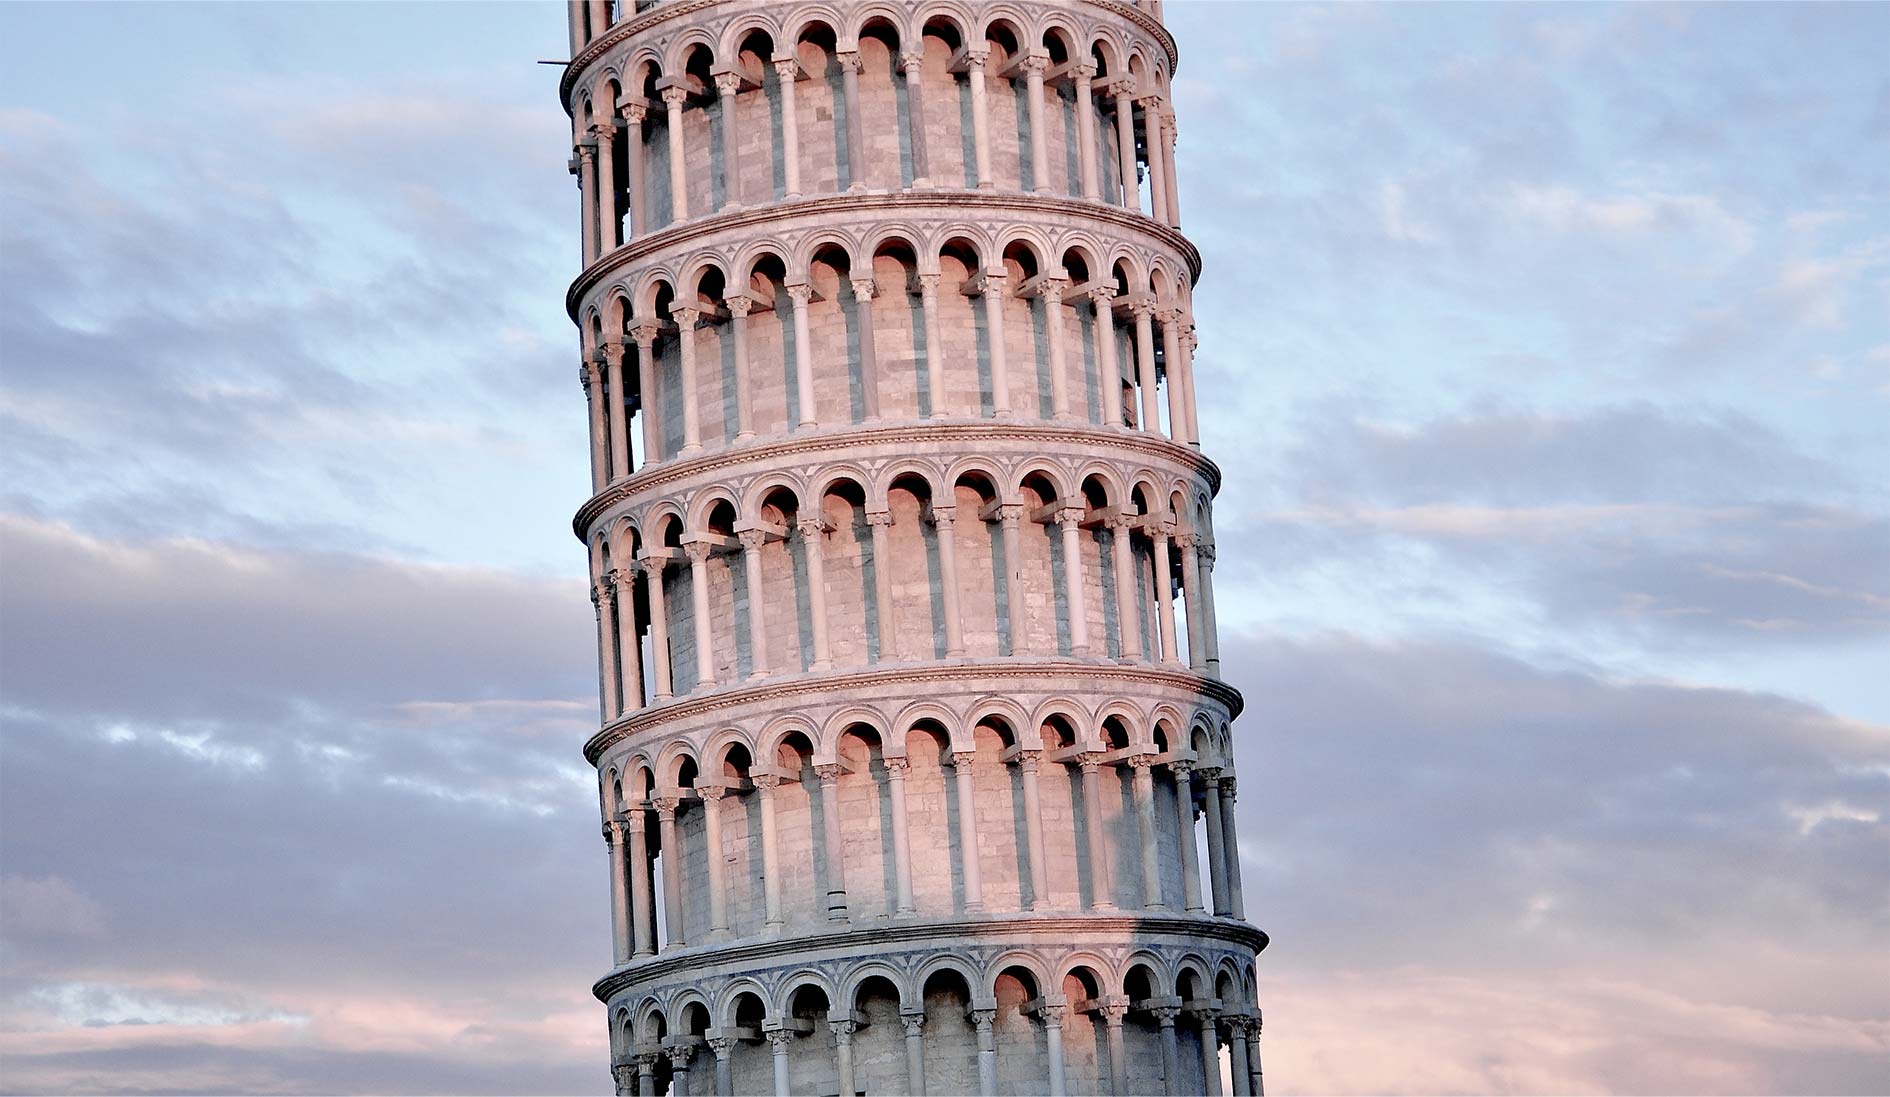 The upper part of the famous leaning tower of Pisa